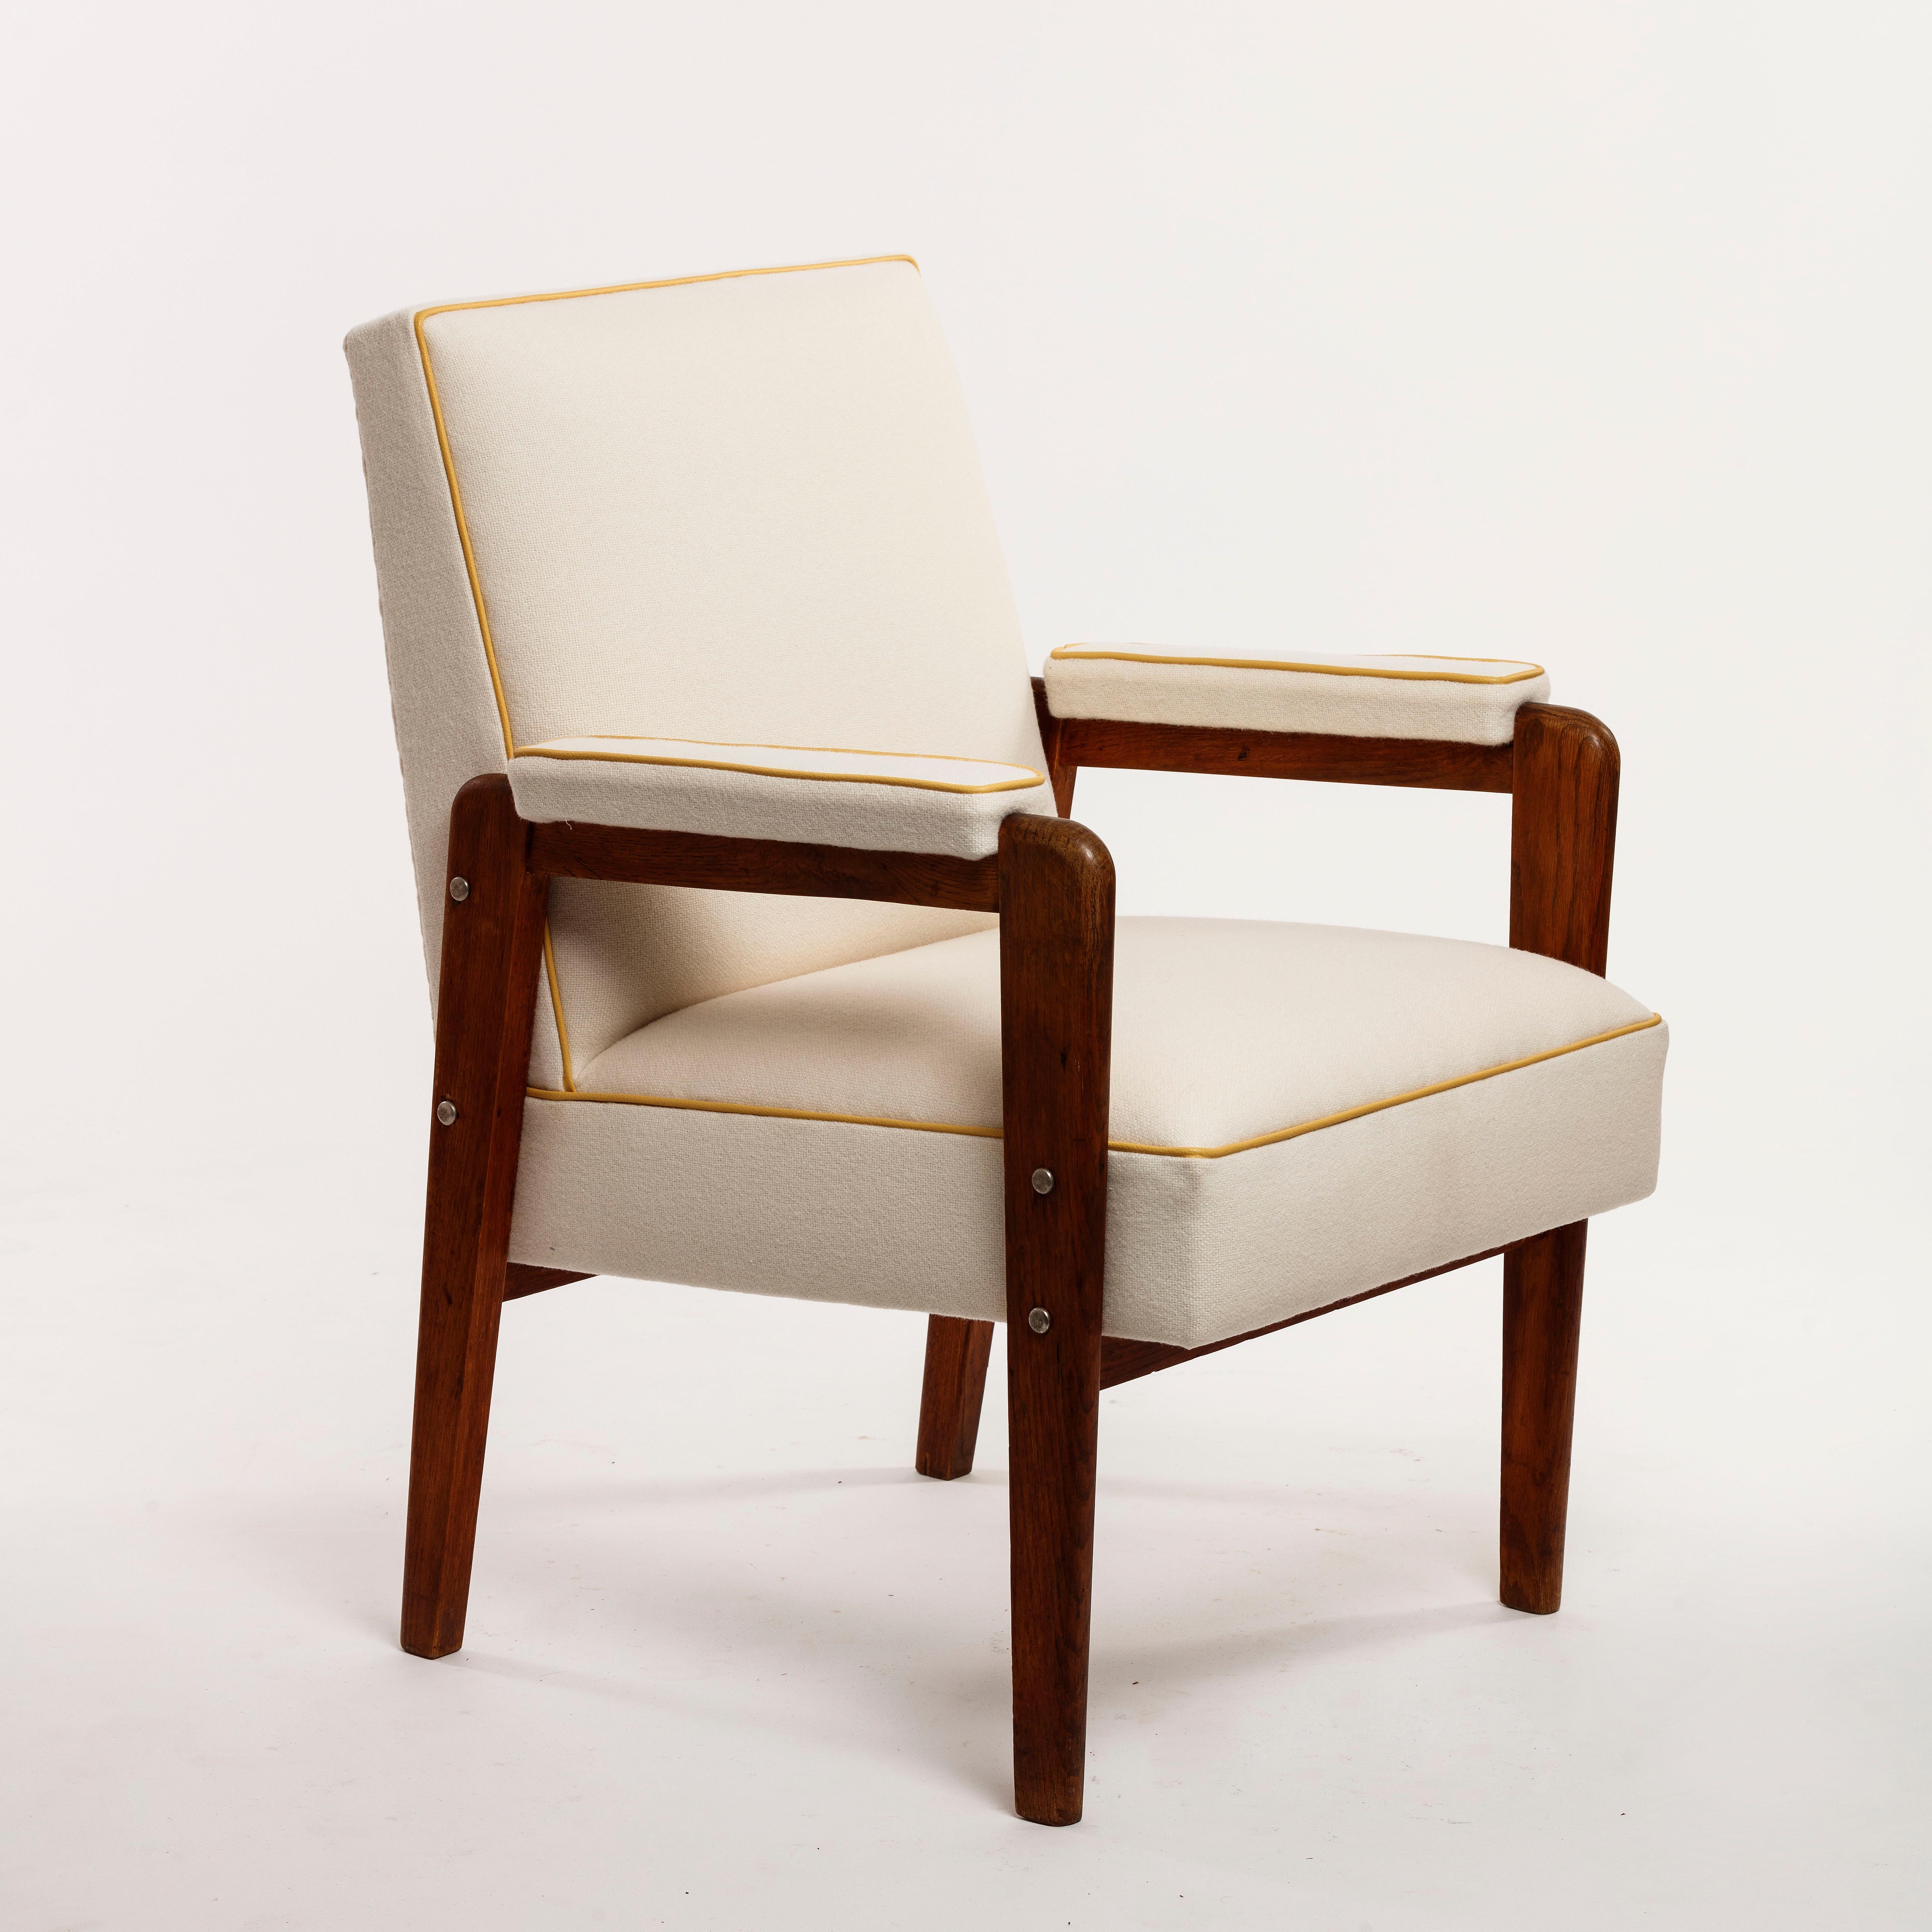 Mid-20th Century Marcel Gascoin Armchair Created in 1950 for the Cité Universitaire Antony France For Sale